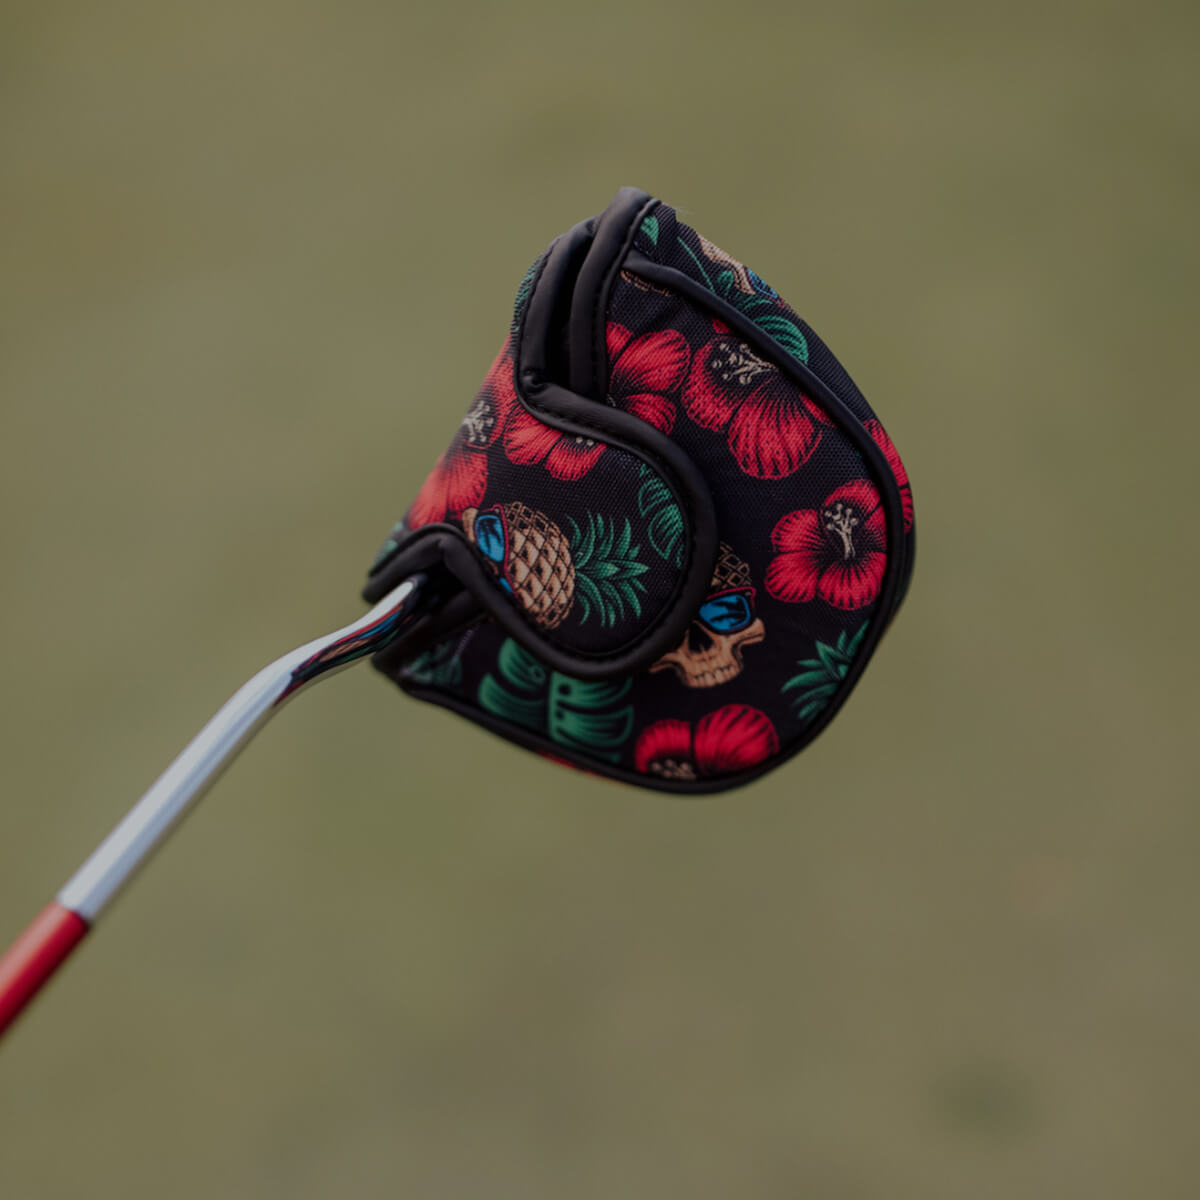 Putter Covers